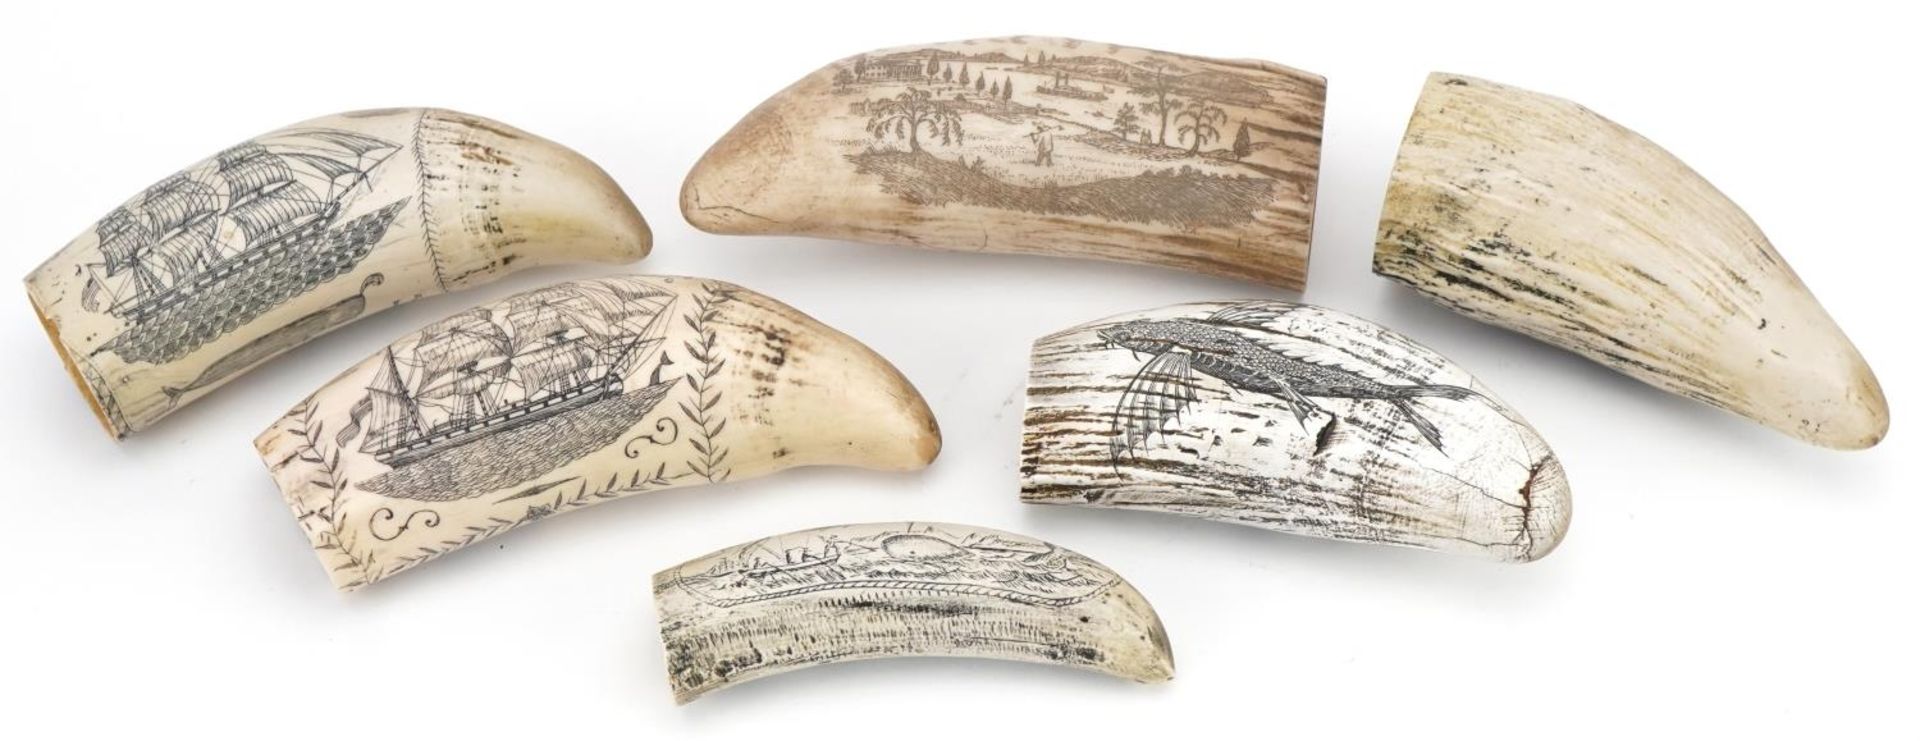 Six scrimshaw style decorative tusks decorated with figures and ships, the largest 16cm high - Image 8 of 14